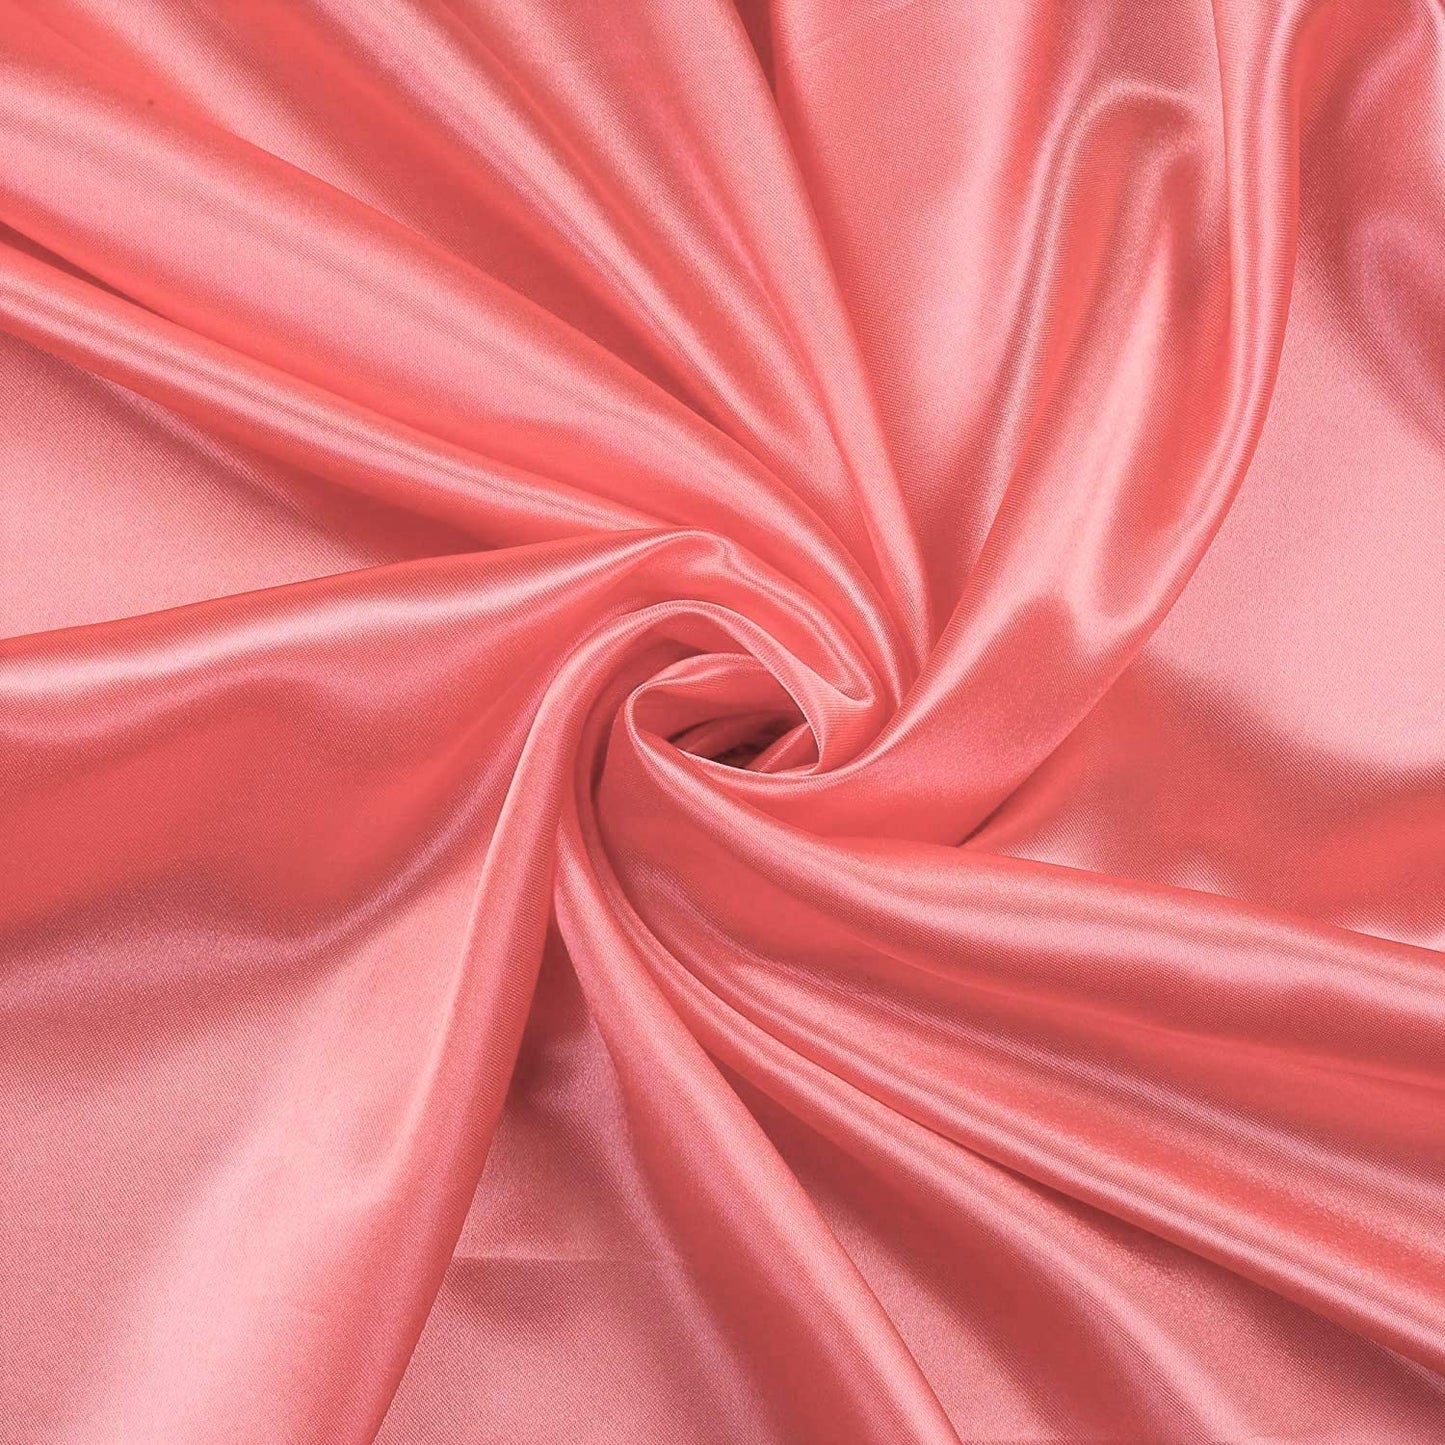 100% Polyester Soft Bridal Charmeuse Satin Fabric (Coral # 44,